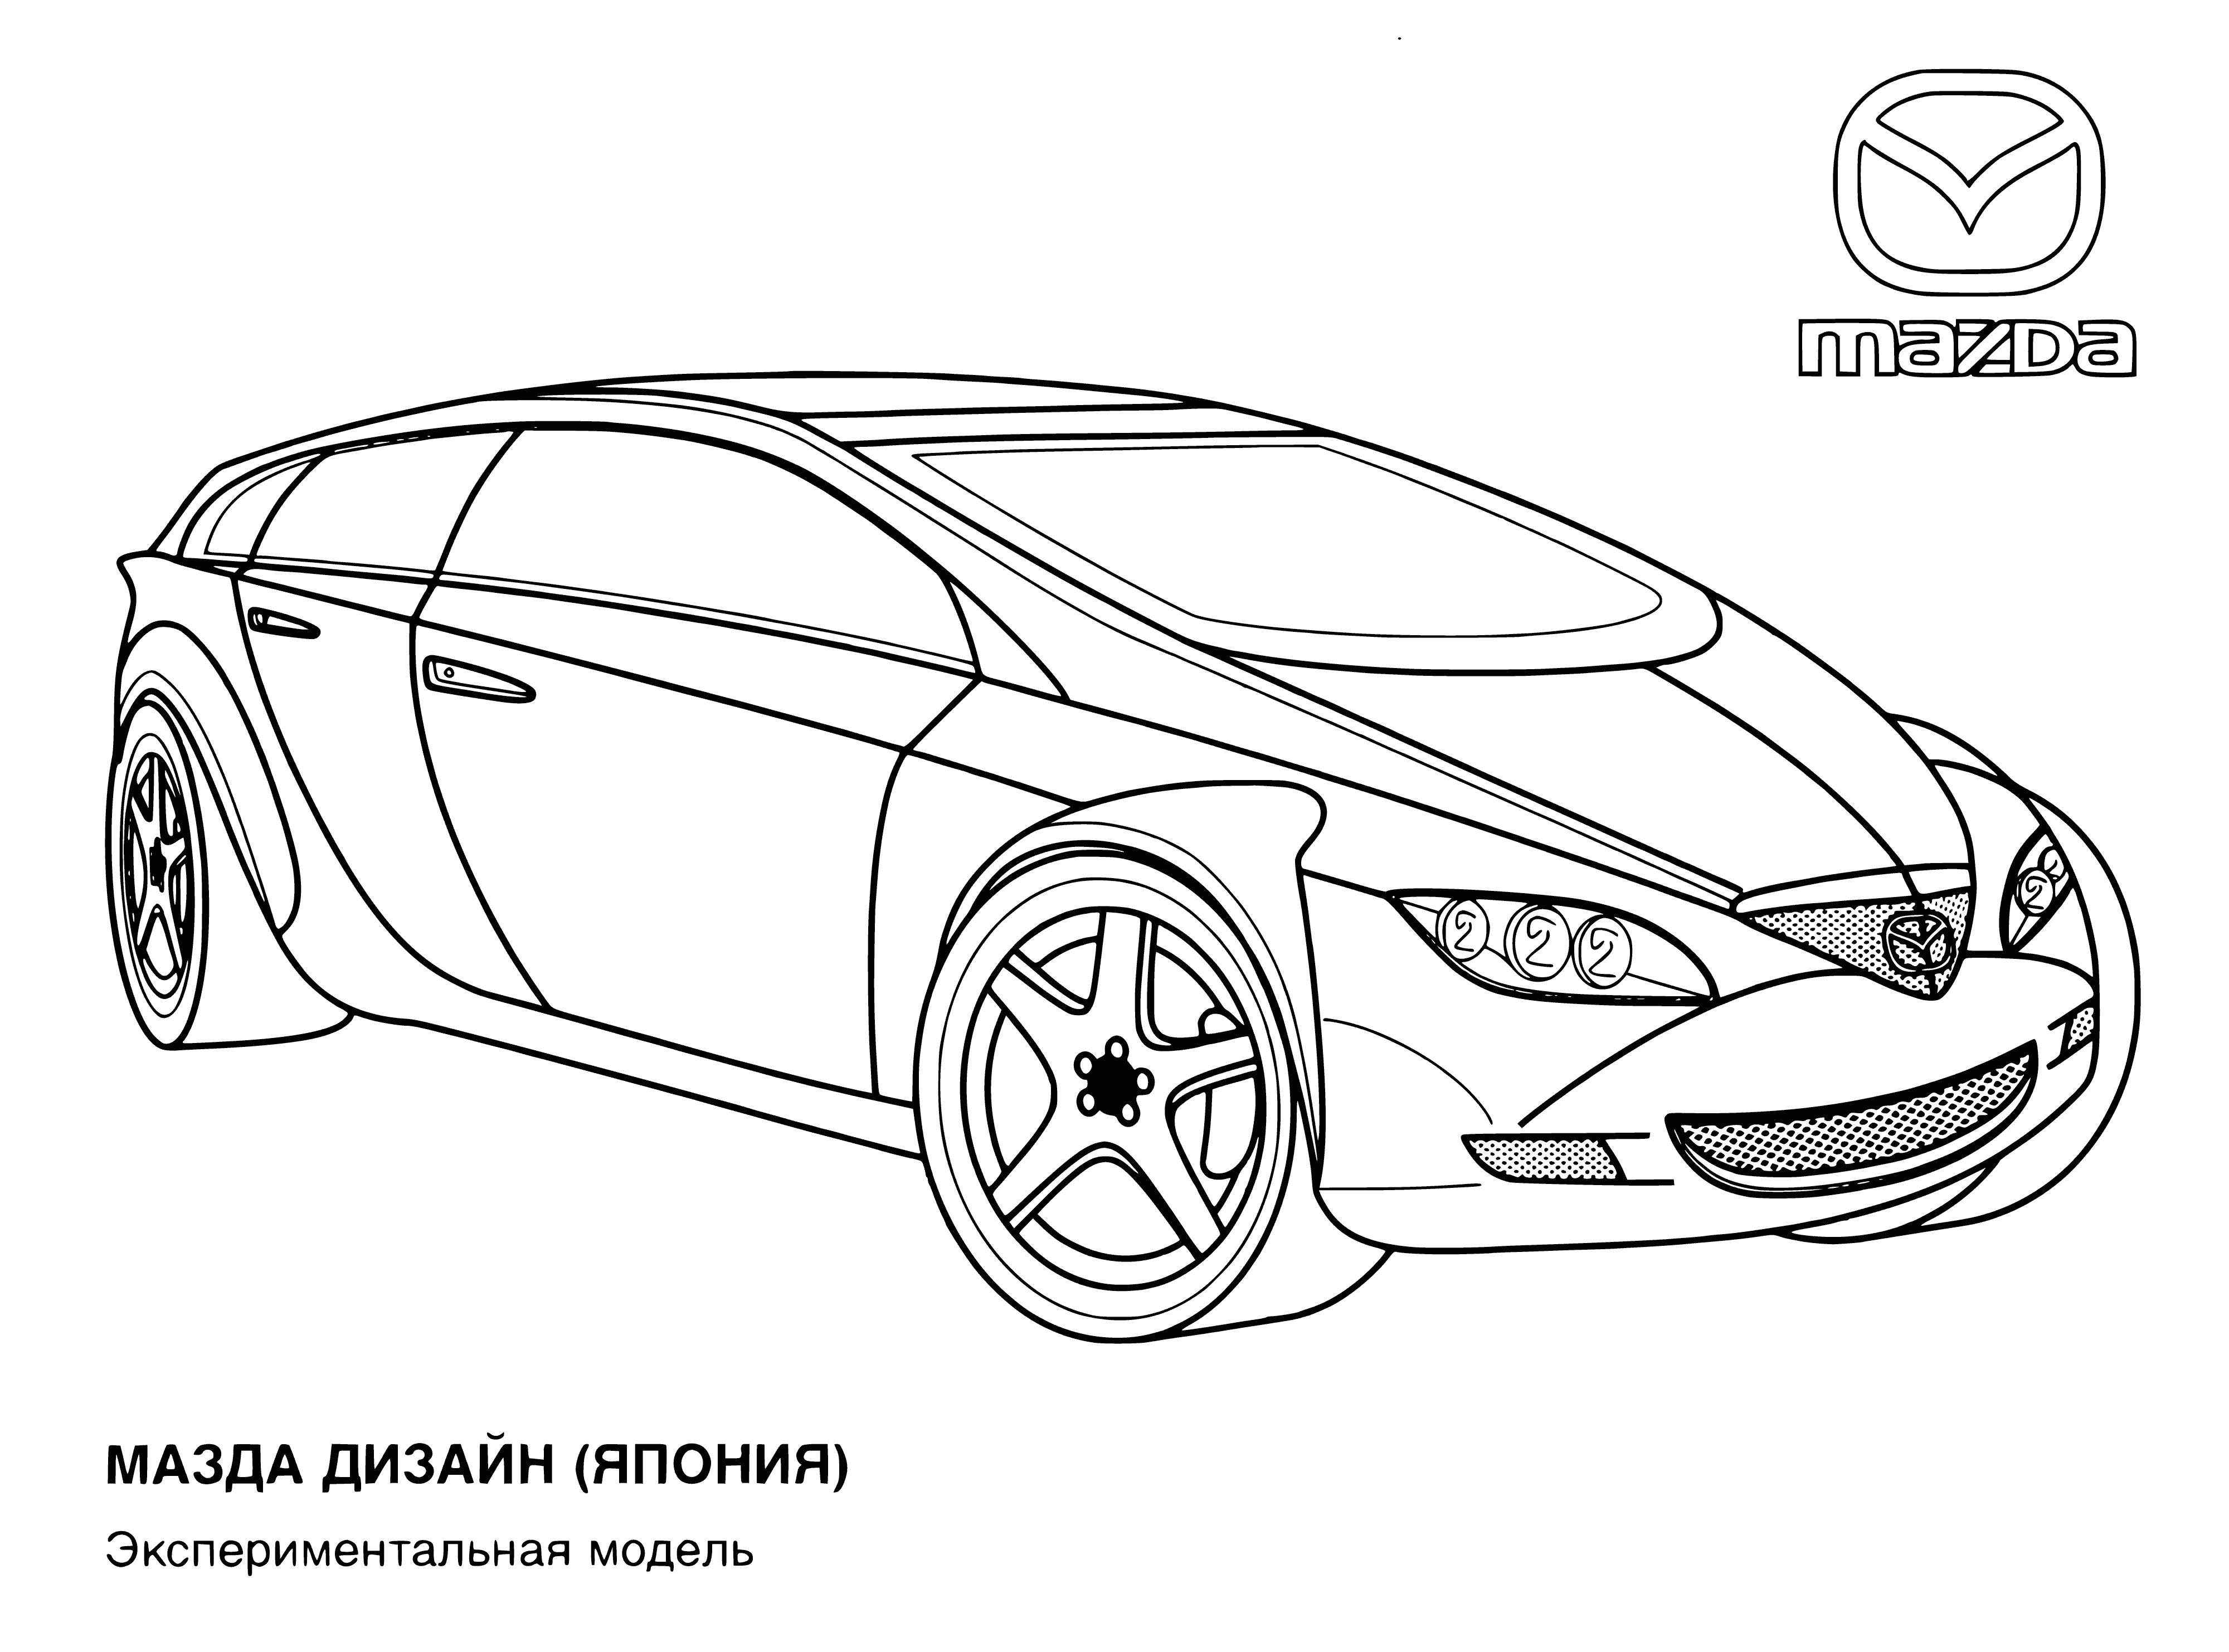 coloring page: Four cars in a coloring page - white, silver, silver and blue - with a Mazda logo.